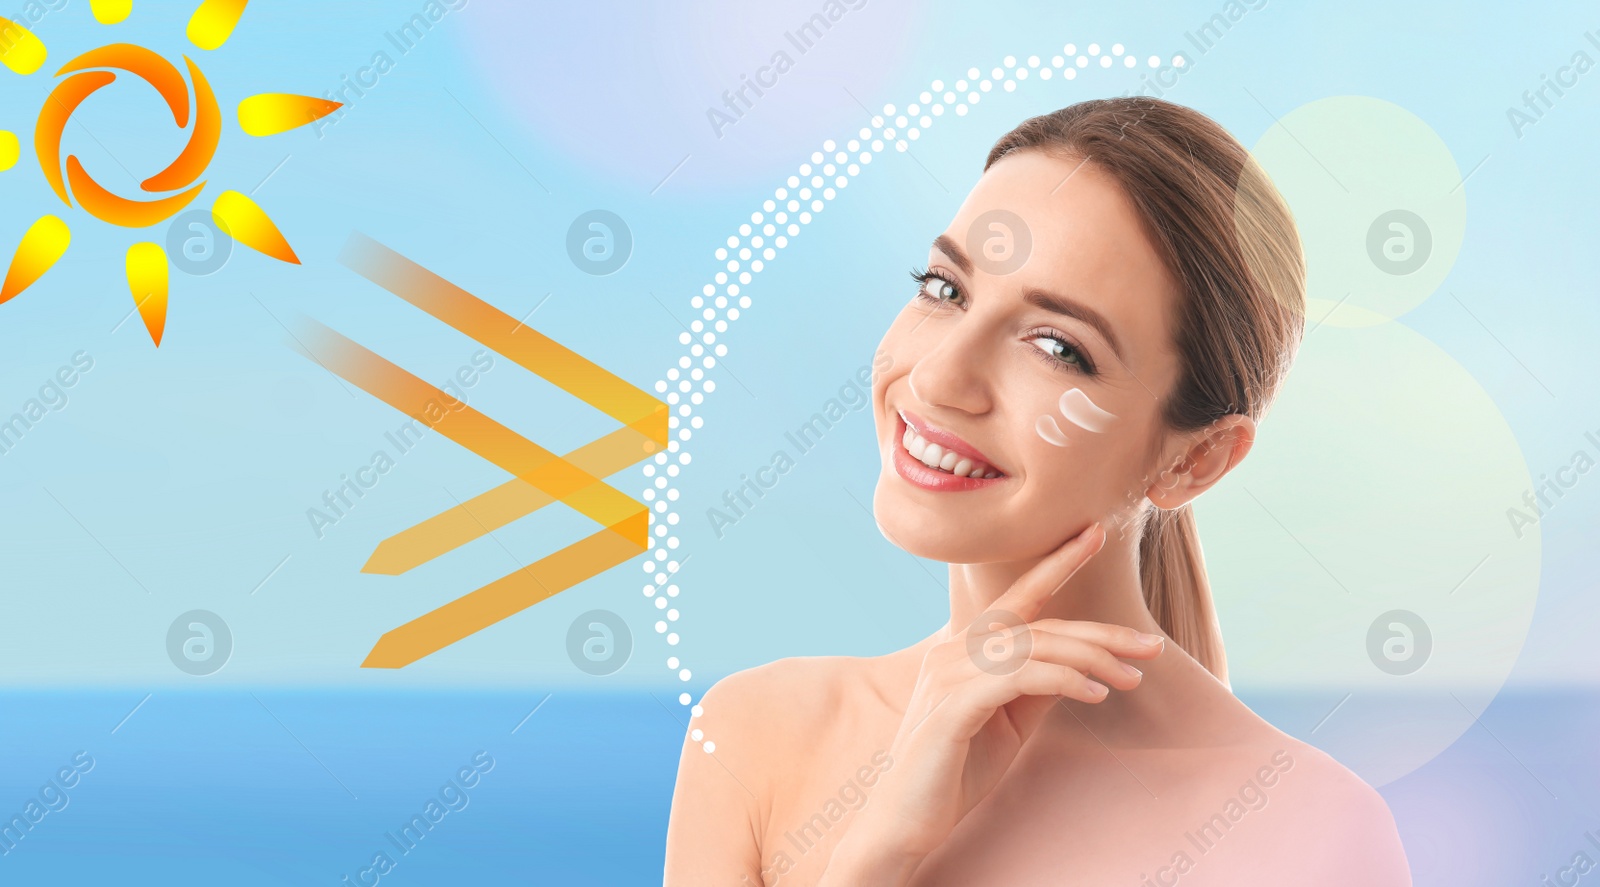 Image of Illustration of sun protection layer and beautiful young woman with healthy skin on color background